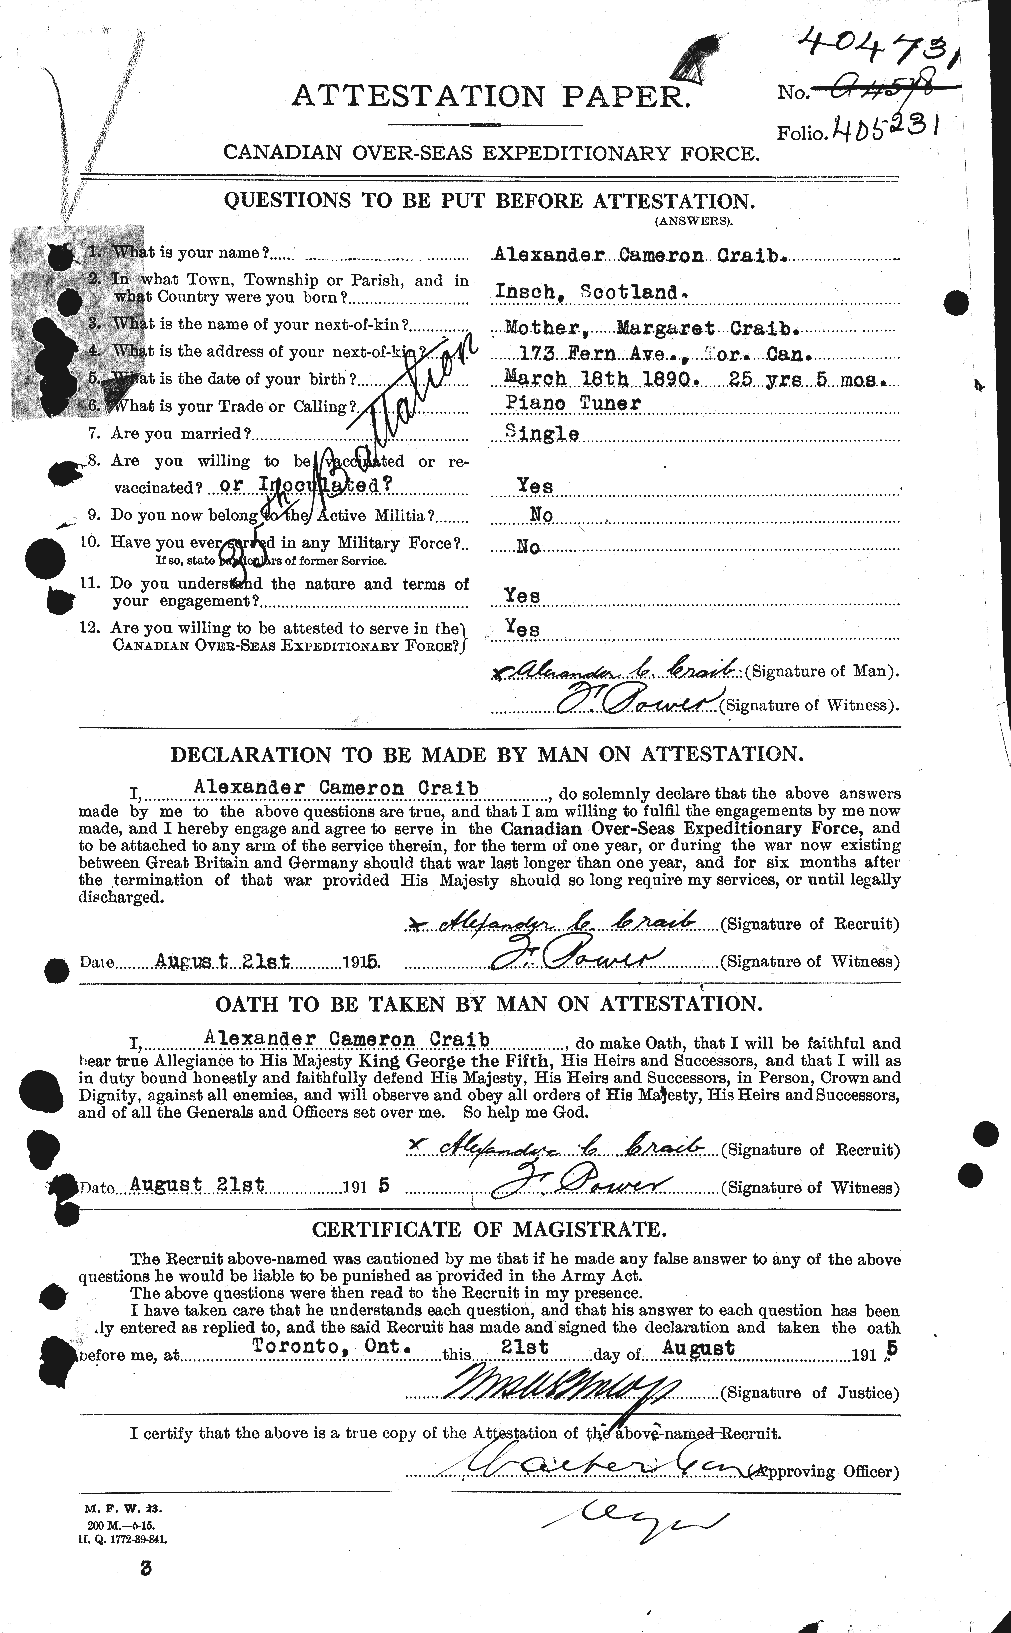 Personnel Records of the First World War - CEF 062701a